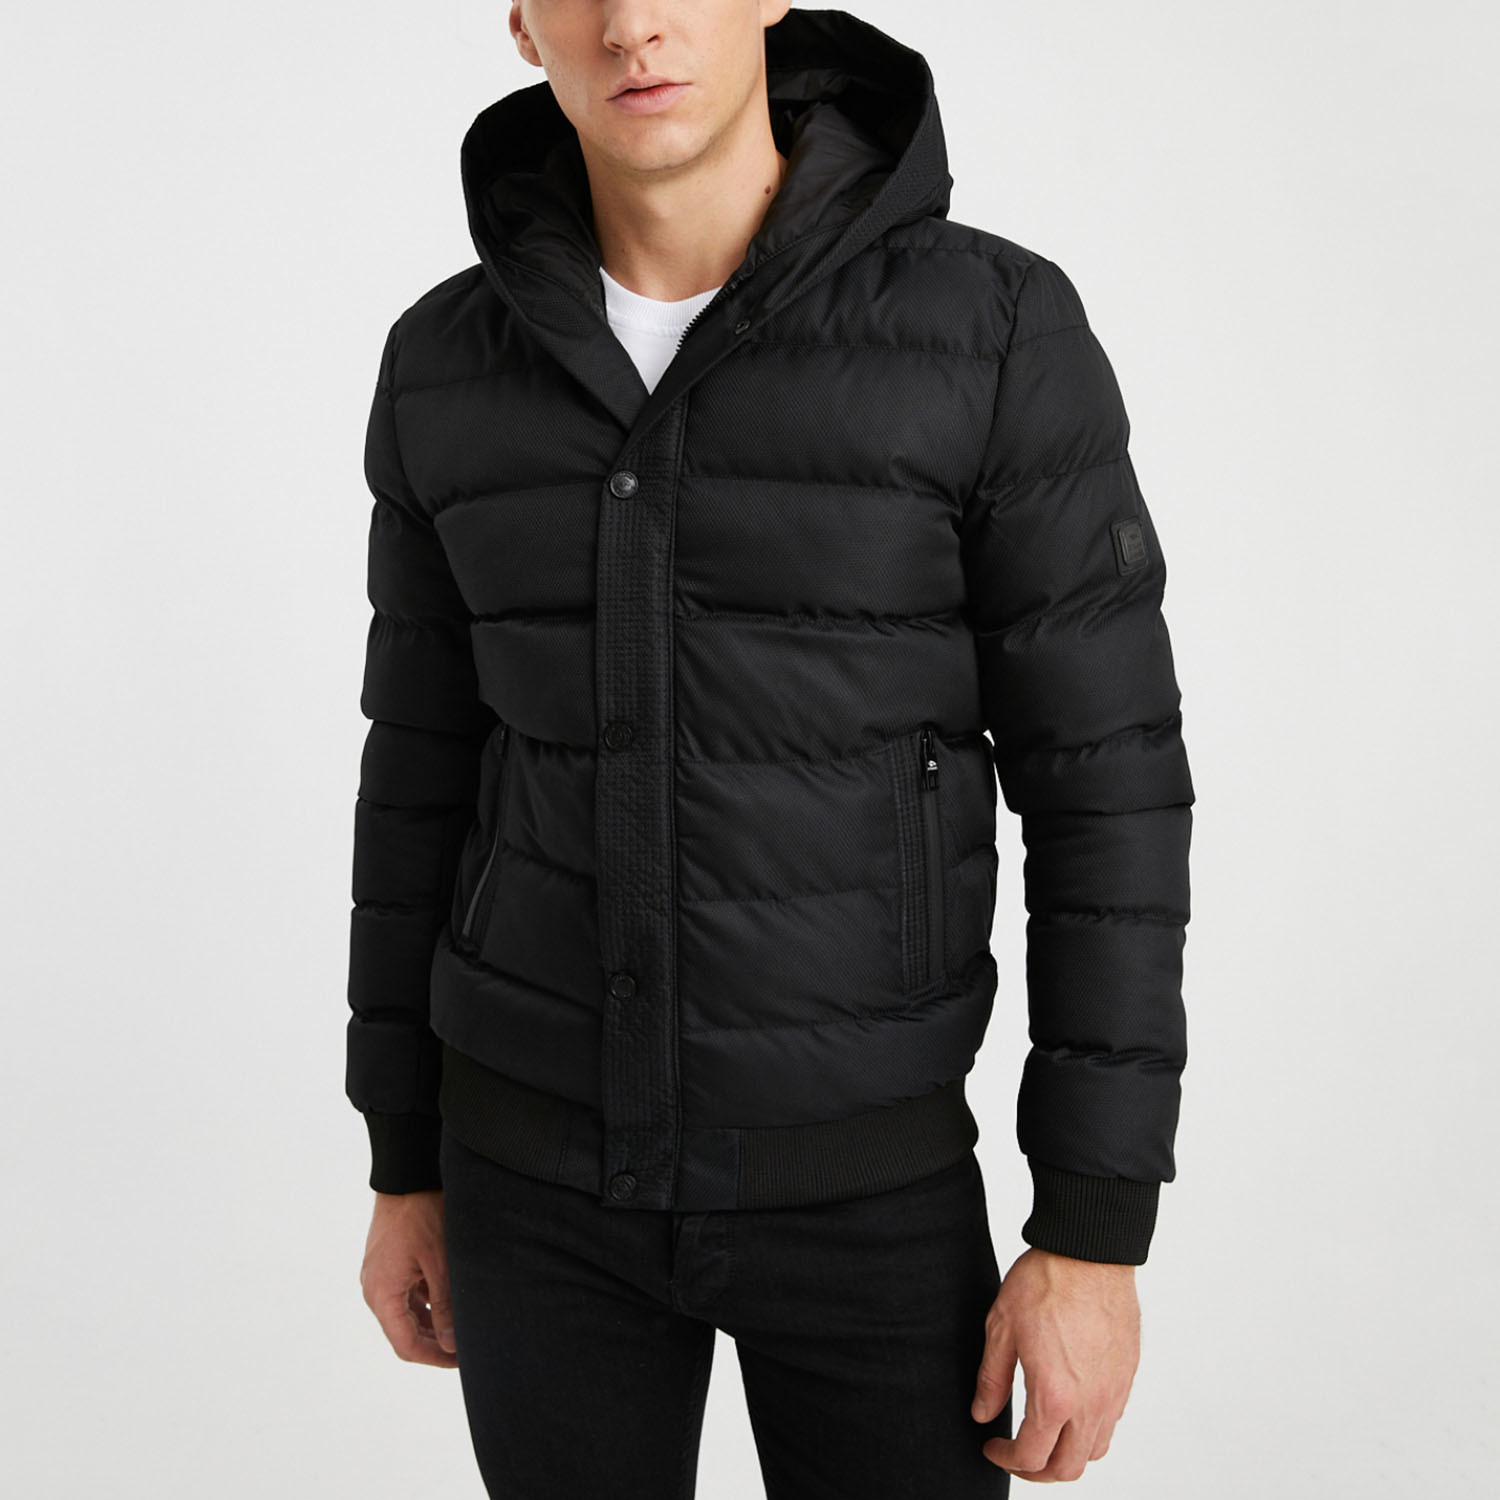 Artic Puff Jacket // Black (M) - Clearance: Clothing, Shoes ...